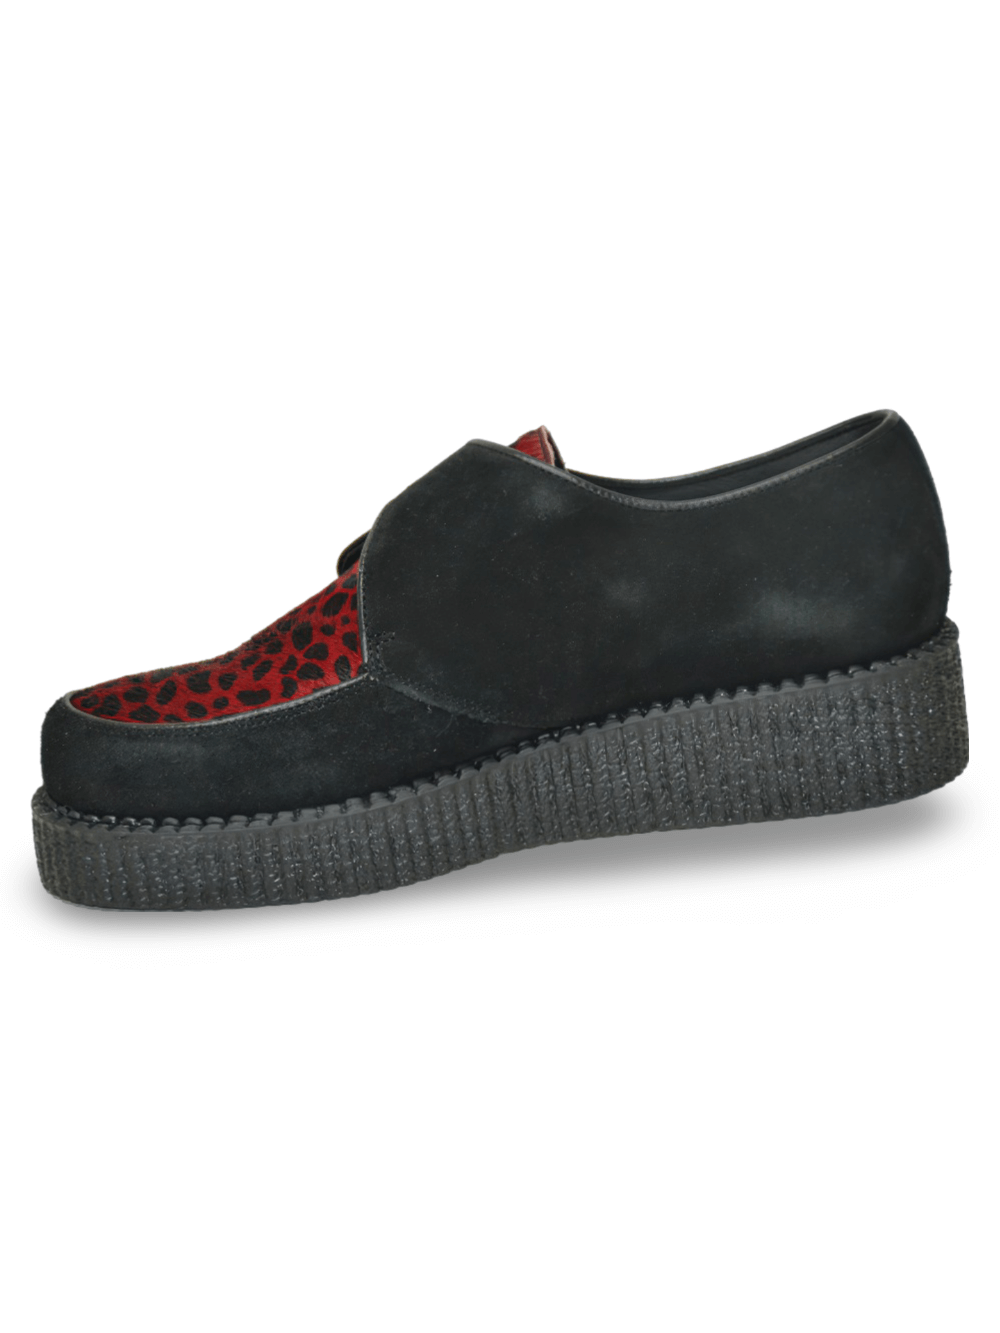 Red and Black Leopard Suede Creepers with Buckle